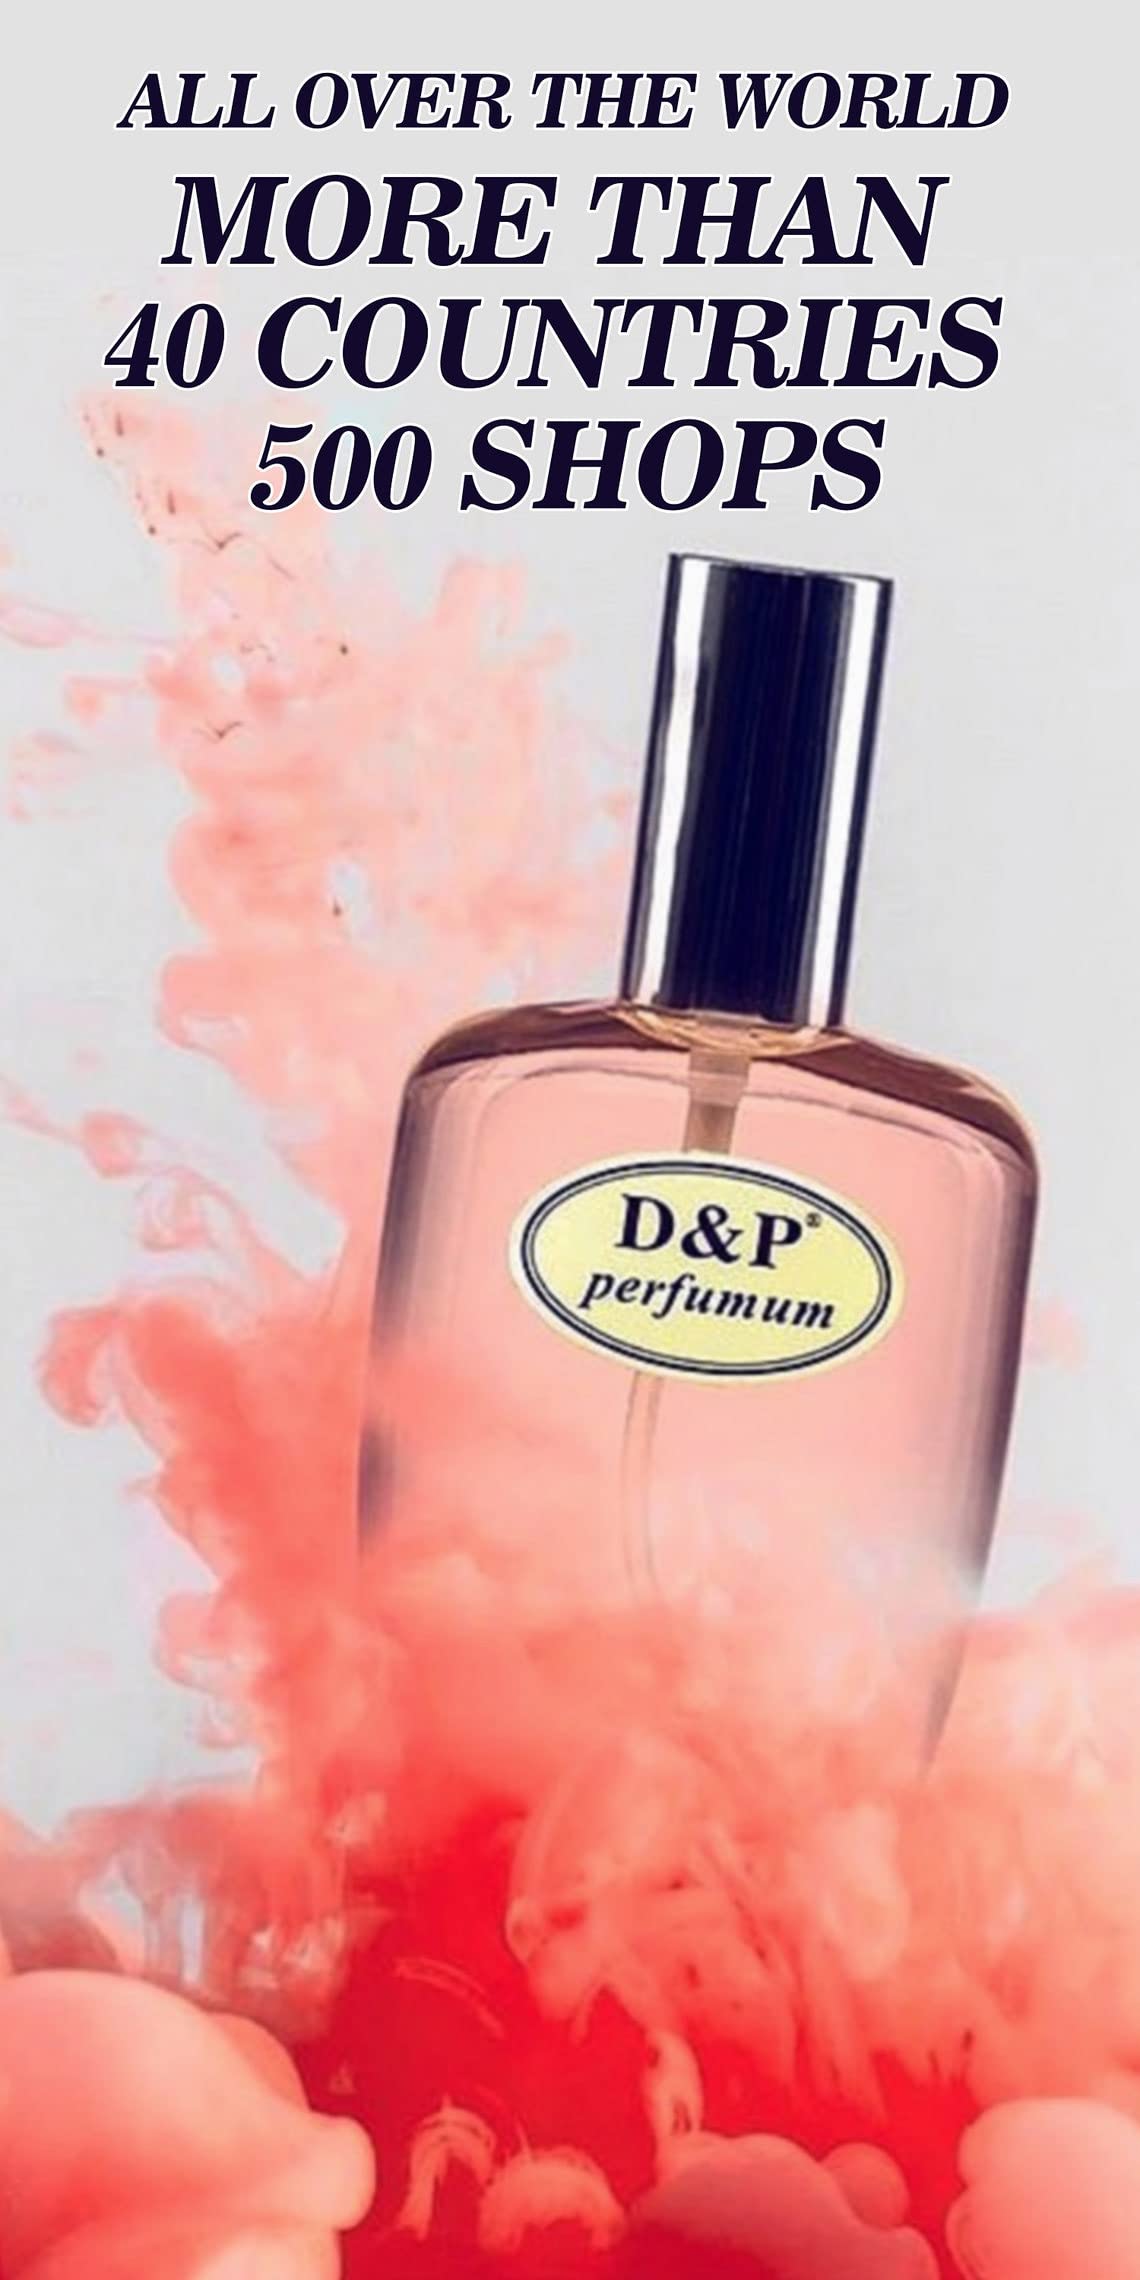 D&P Perfumum Inpired by Aventus for Men, 1.69Fl oz. EDP Mens fragrance with Jasmine, Velvety Woods and Musk. It is a sensual fragrance that makes a great gift.